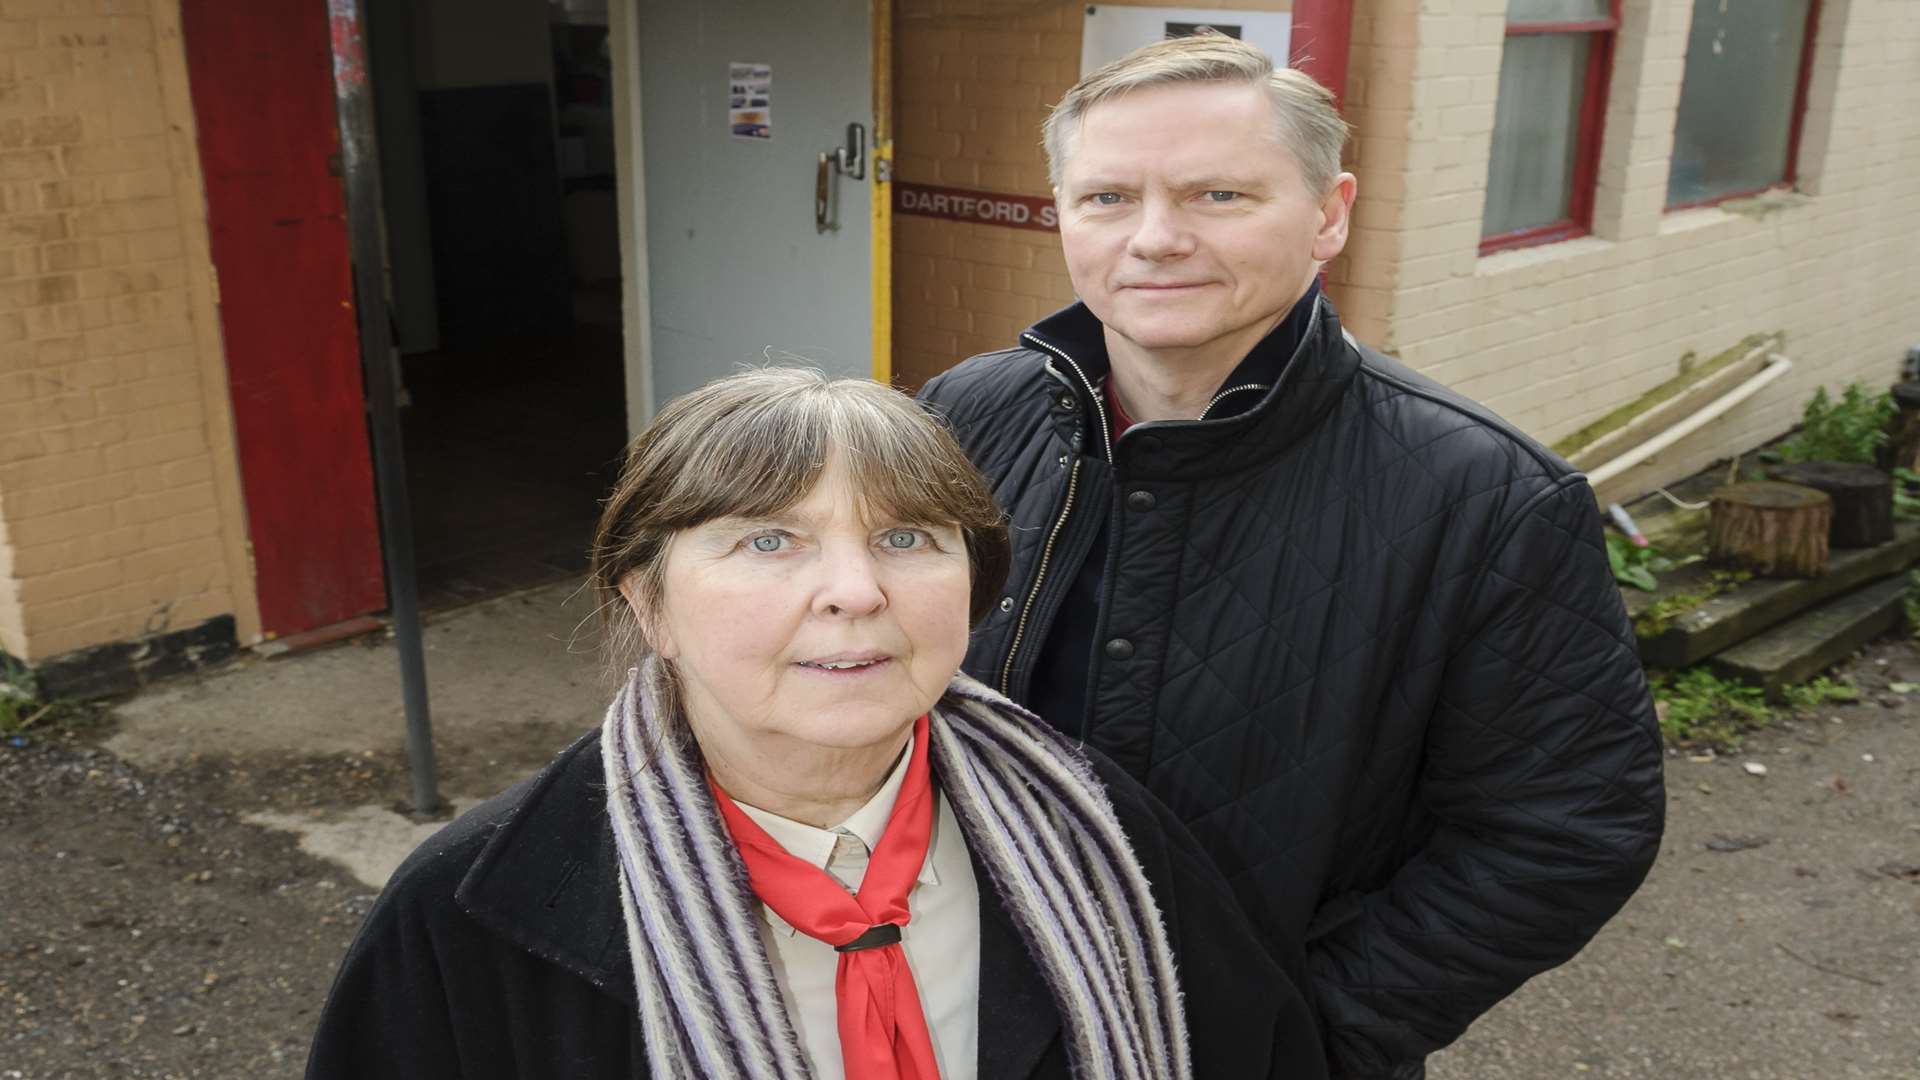 Assistant Group Scout Leader Lyn Medcalf, left, and Chairman Neil Young. 5th Dartford Scout Group are hoping to be able to replace their current building on West Hill, Dartford, as the existing one suffers from serious subsidence.